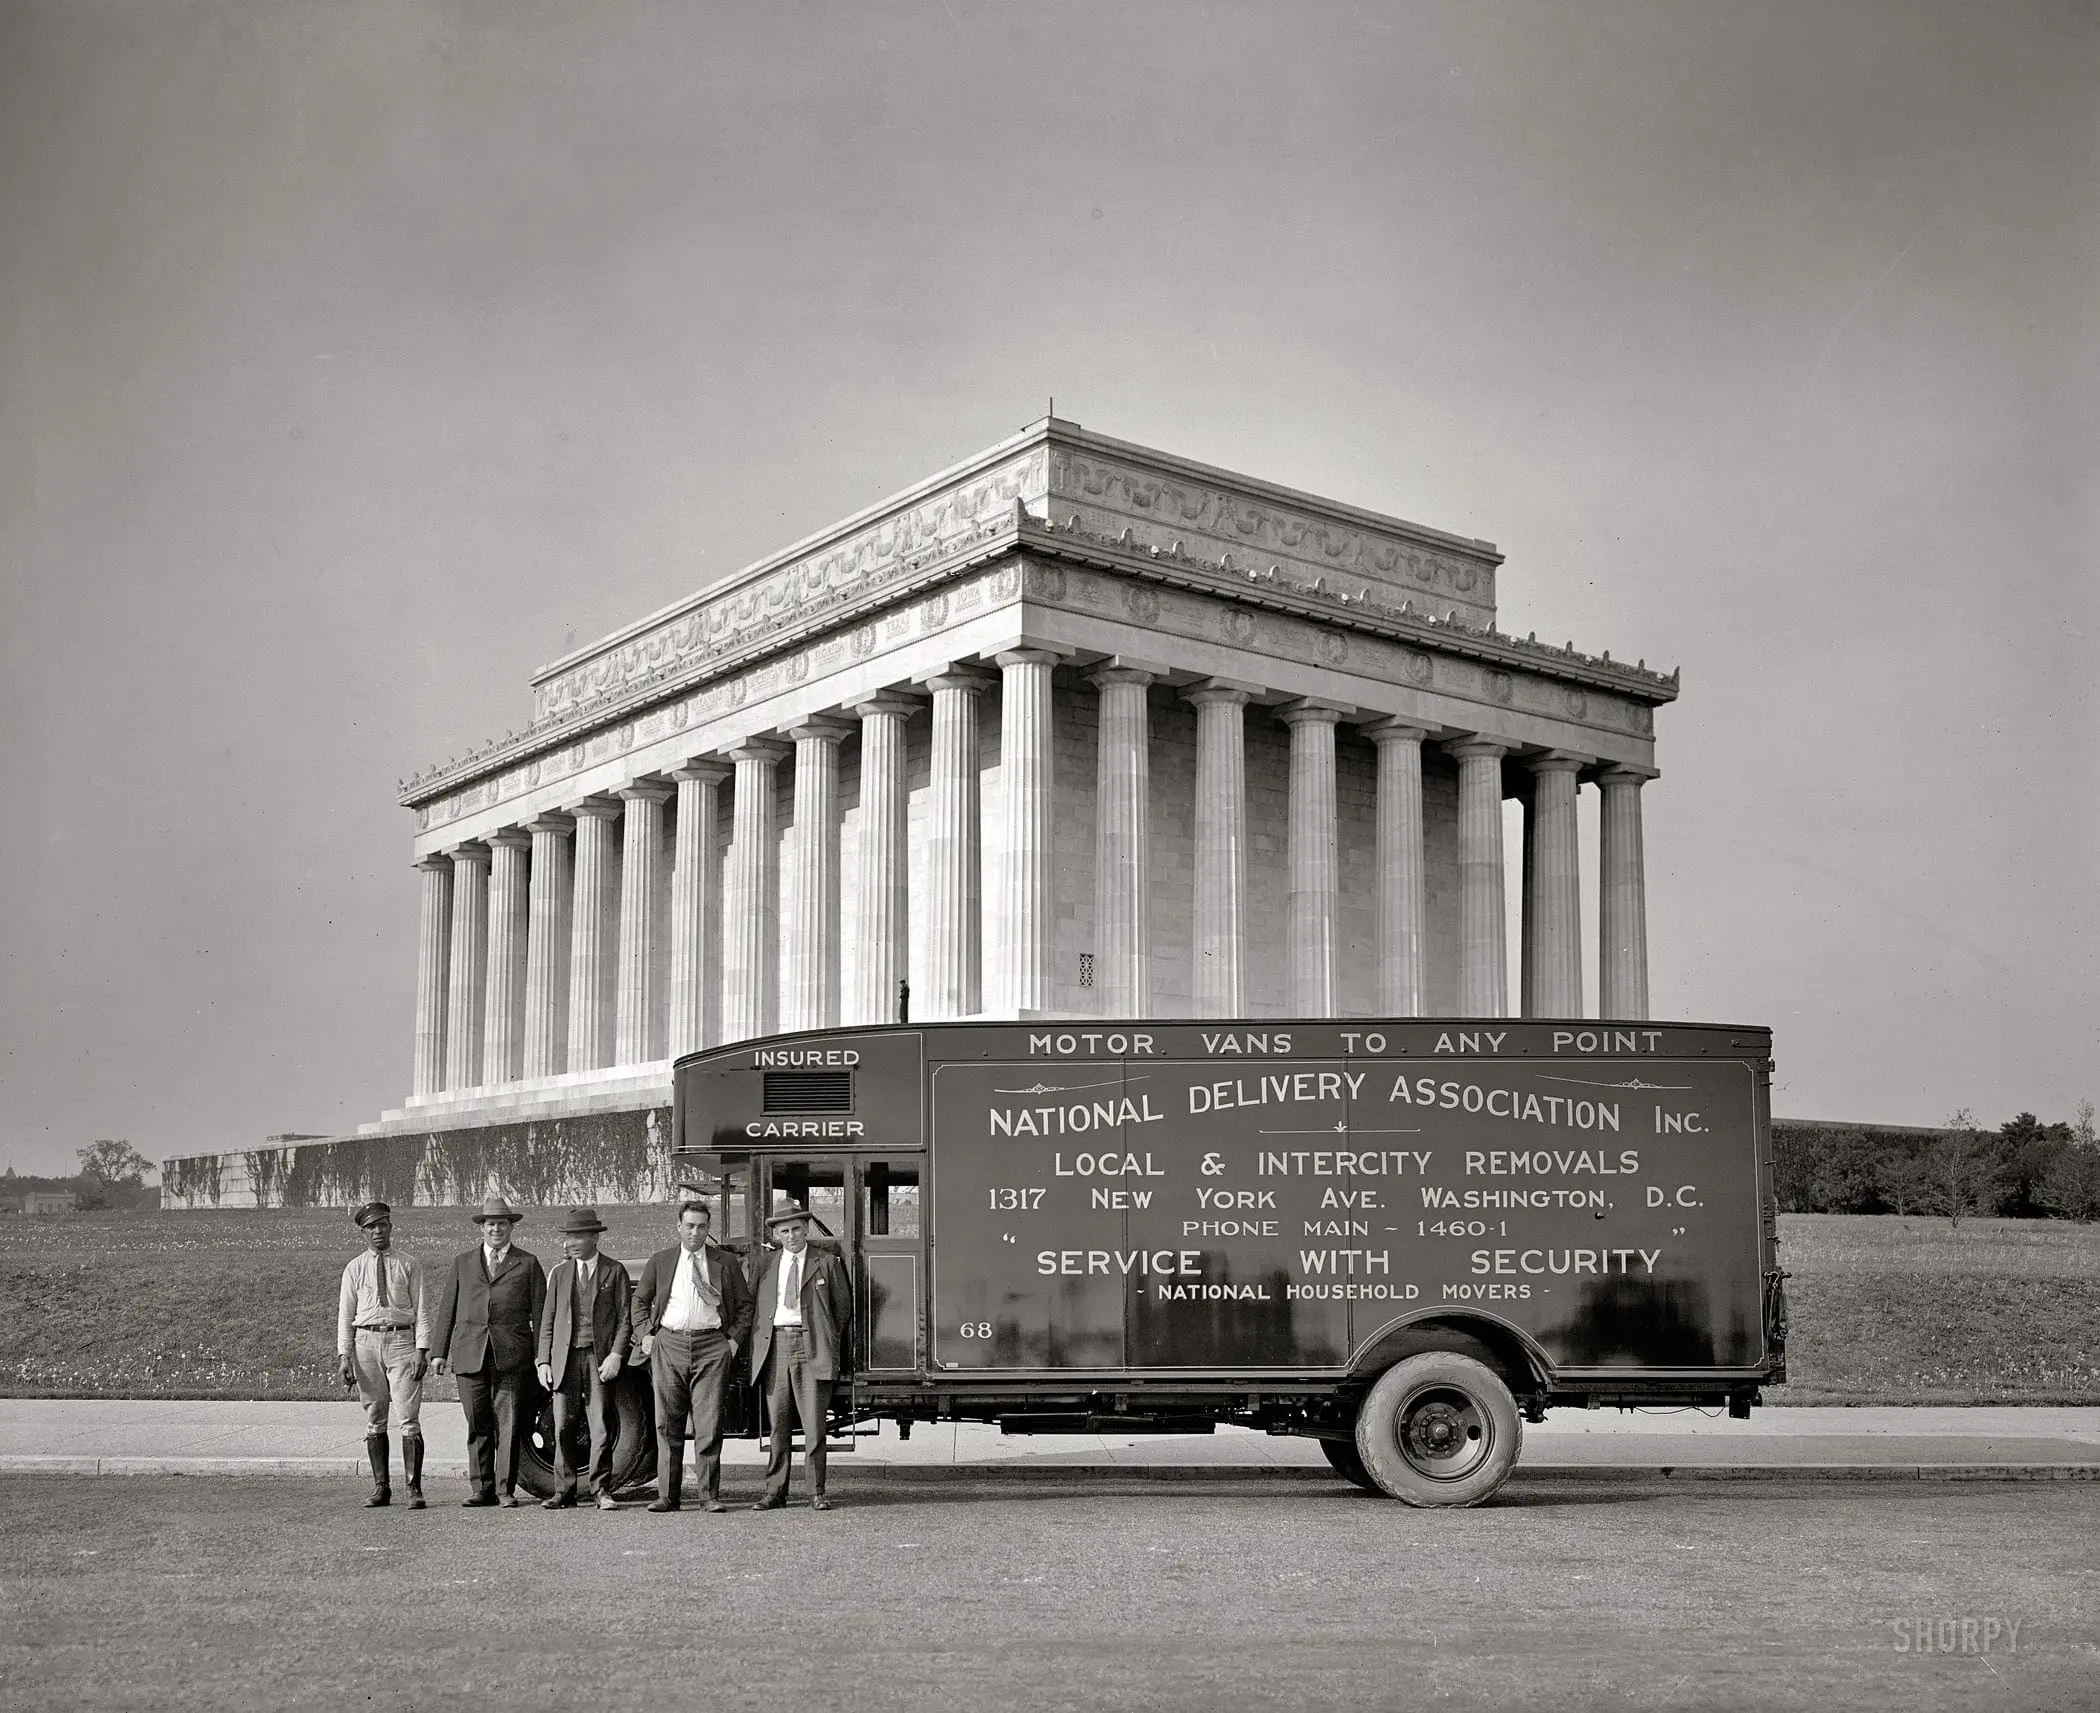 Washington, D.C., circa 1926. "National Delivery Association, Lincoln Memorial." National Photo Company Collection glass negative.